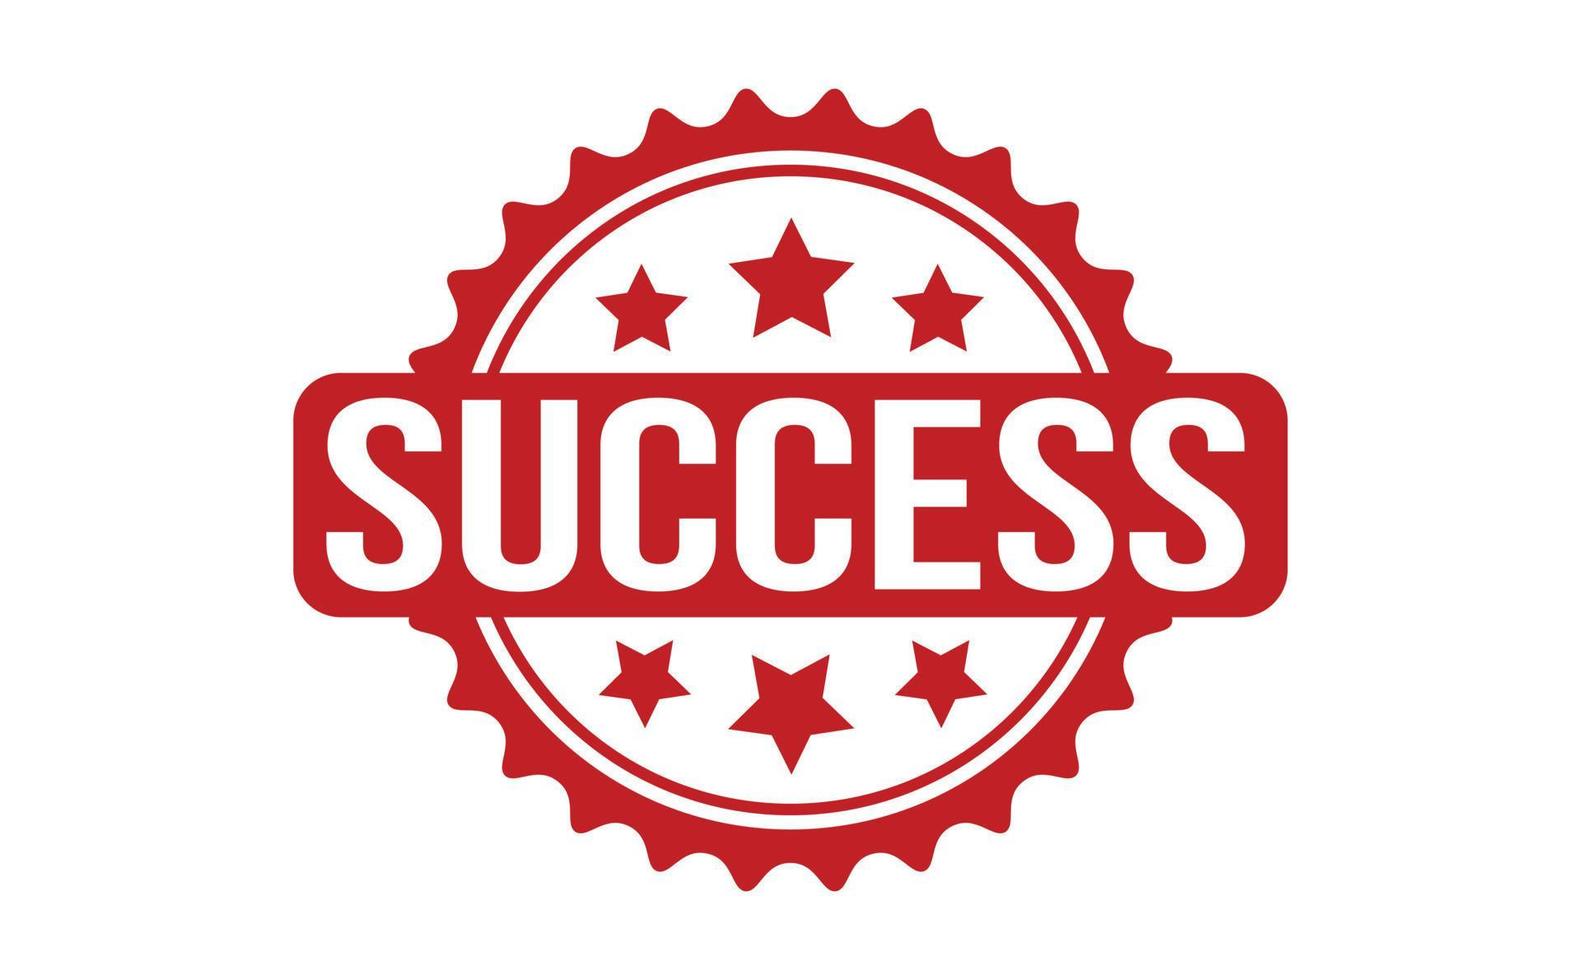 Success Rubber Stamp. Red Success Rubber Grunge Stamp Seal Vector Illustration - Vector